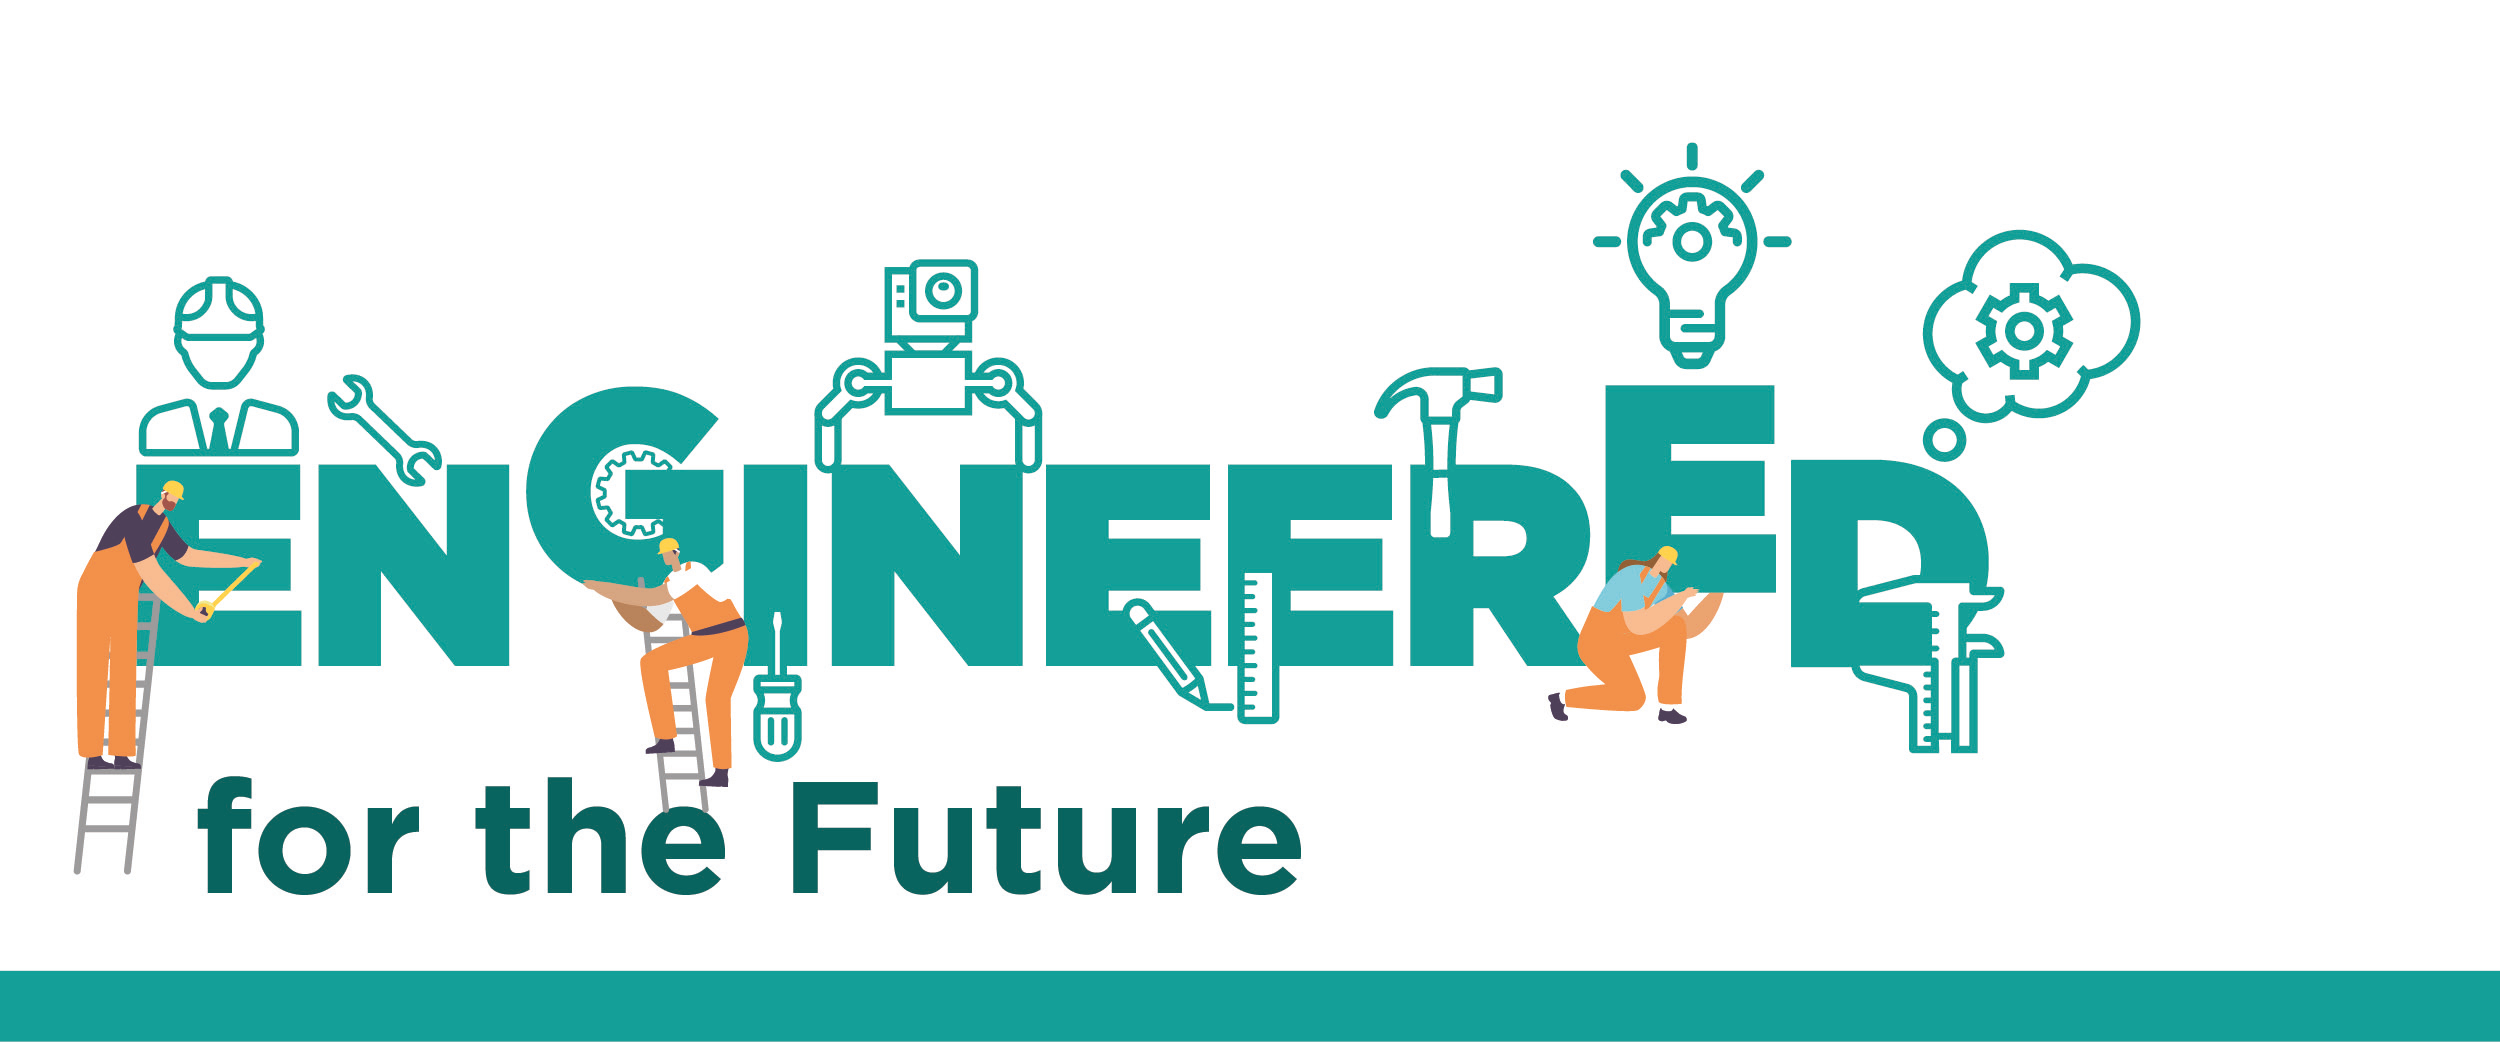 Engineered for the Future banner